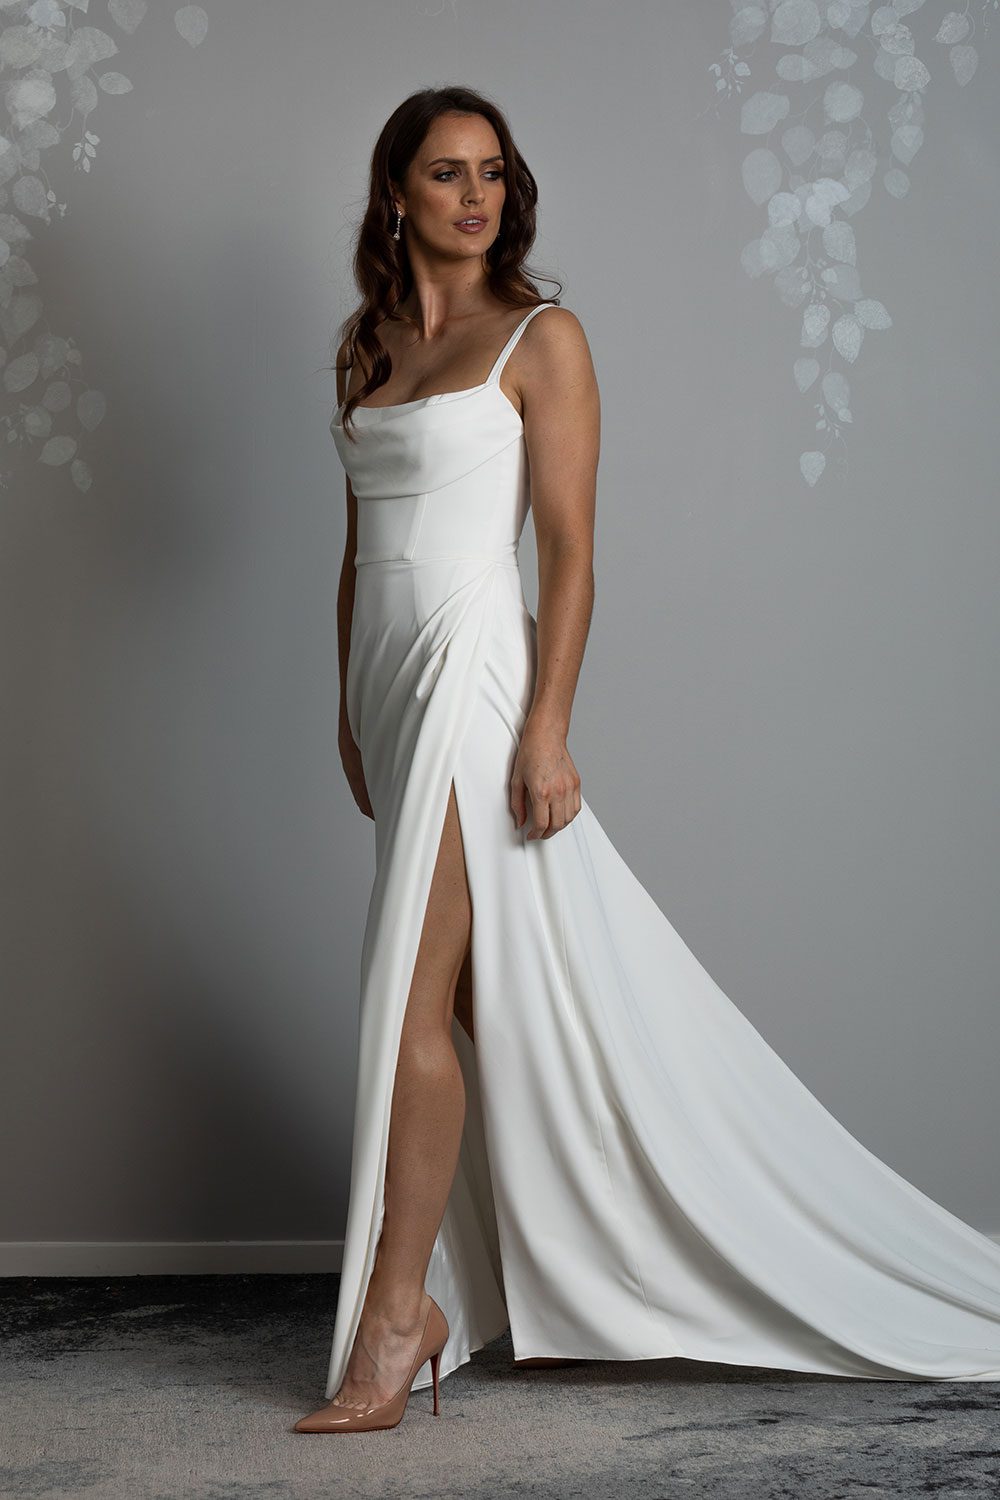 Evelyn Wedding Dress from Vinka Design. A divine gown made in a soft bridal crepe. It has a fitted bodice with soft draping over the bust line to flatter and enhance the figure. The straps compliment this detail by giving the bodice a softened square neckline. The skirt elegantly falls in folds from the side, revealing a flirtatious side split while in motion that falls closed again when still. Model showing side split in soft bridal crepe skirt